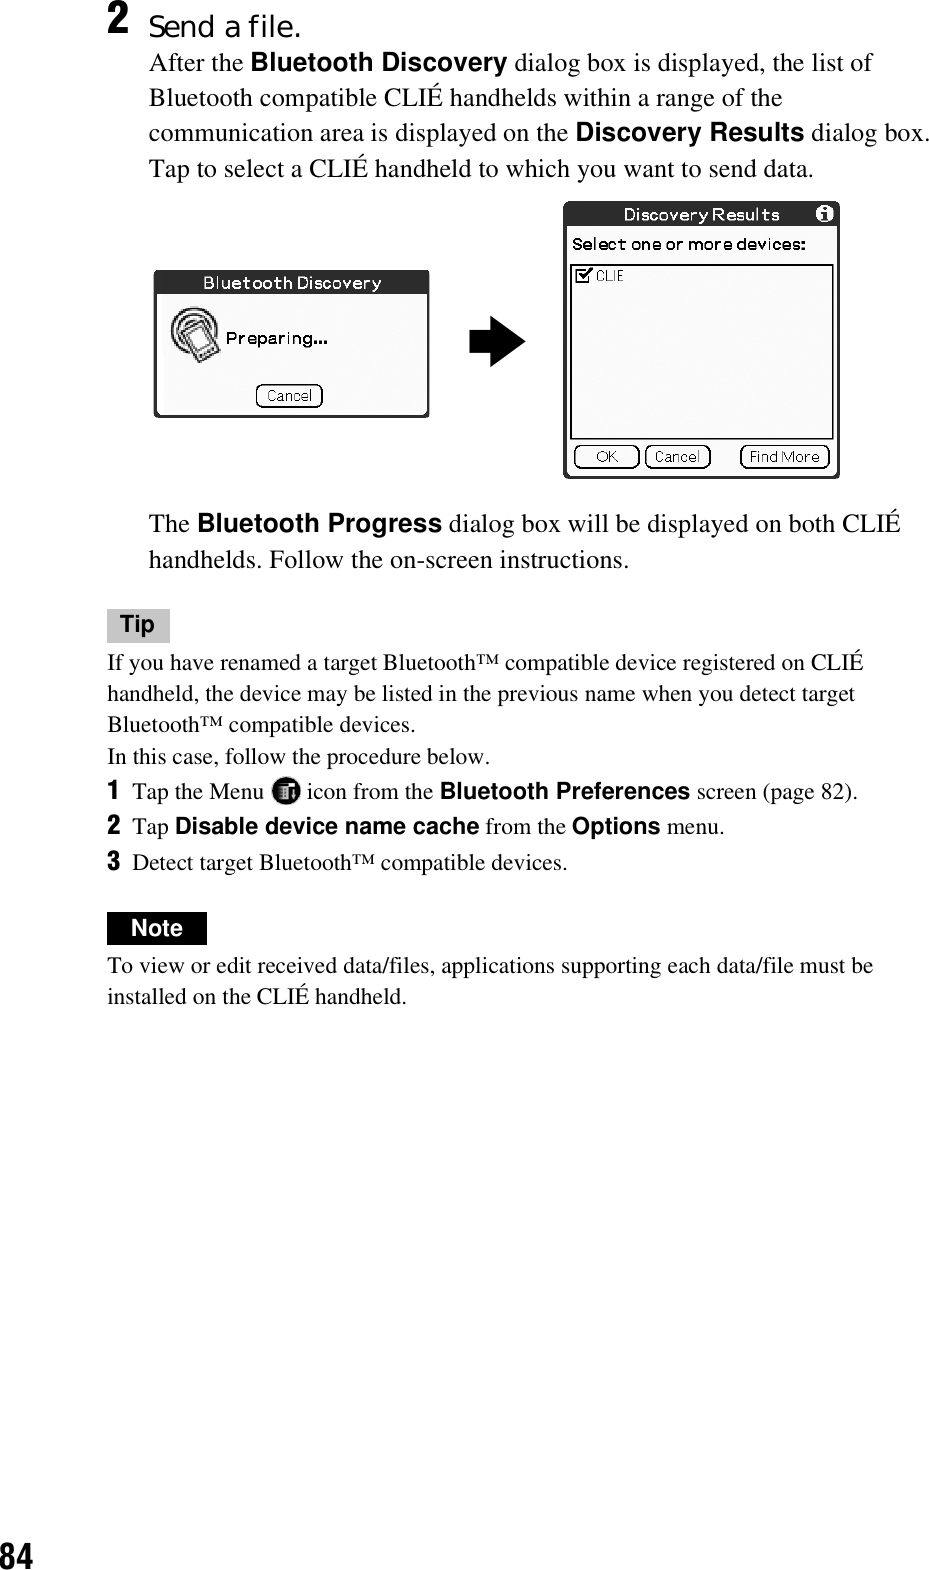 84TipIf you have renamed a target Bluetooth™ compatible device registered on CLIÉ handheld, the device may be listed in the previous name when you detect target Bluetooth™ compatible devices.In this case, follow the procedure below.1Tap the Menu   icon from the Bluetooth Preferences screen (page 82).2Tap Disable device name cache from the Options menu.3Detect target Bluetooth™ compatible devices.NoteTo view or edit received data/files, applications supporting each data/file must be installed on the CLIÉ handheld.2Send a file.After the Bluetooth Discovery dialog box is displayed, the list of Bluetooth compatible CLIÉ handhelds within a range of the communication area is displayed on the Discovery Results dialog box.Tap to select a CLIÉ handheld to which you want to send data.The Bluetooth Progress dialog box will be displayed on both CLIÉ handhelds. Follow the on-screen instructions.b